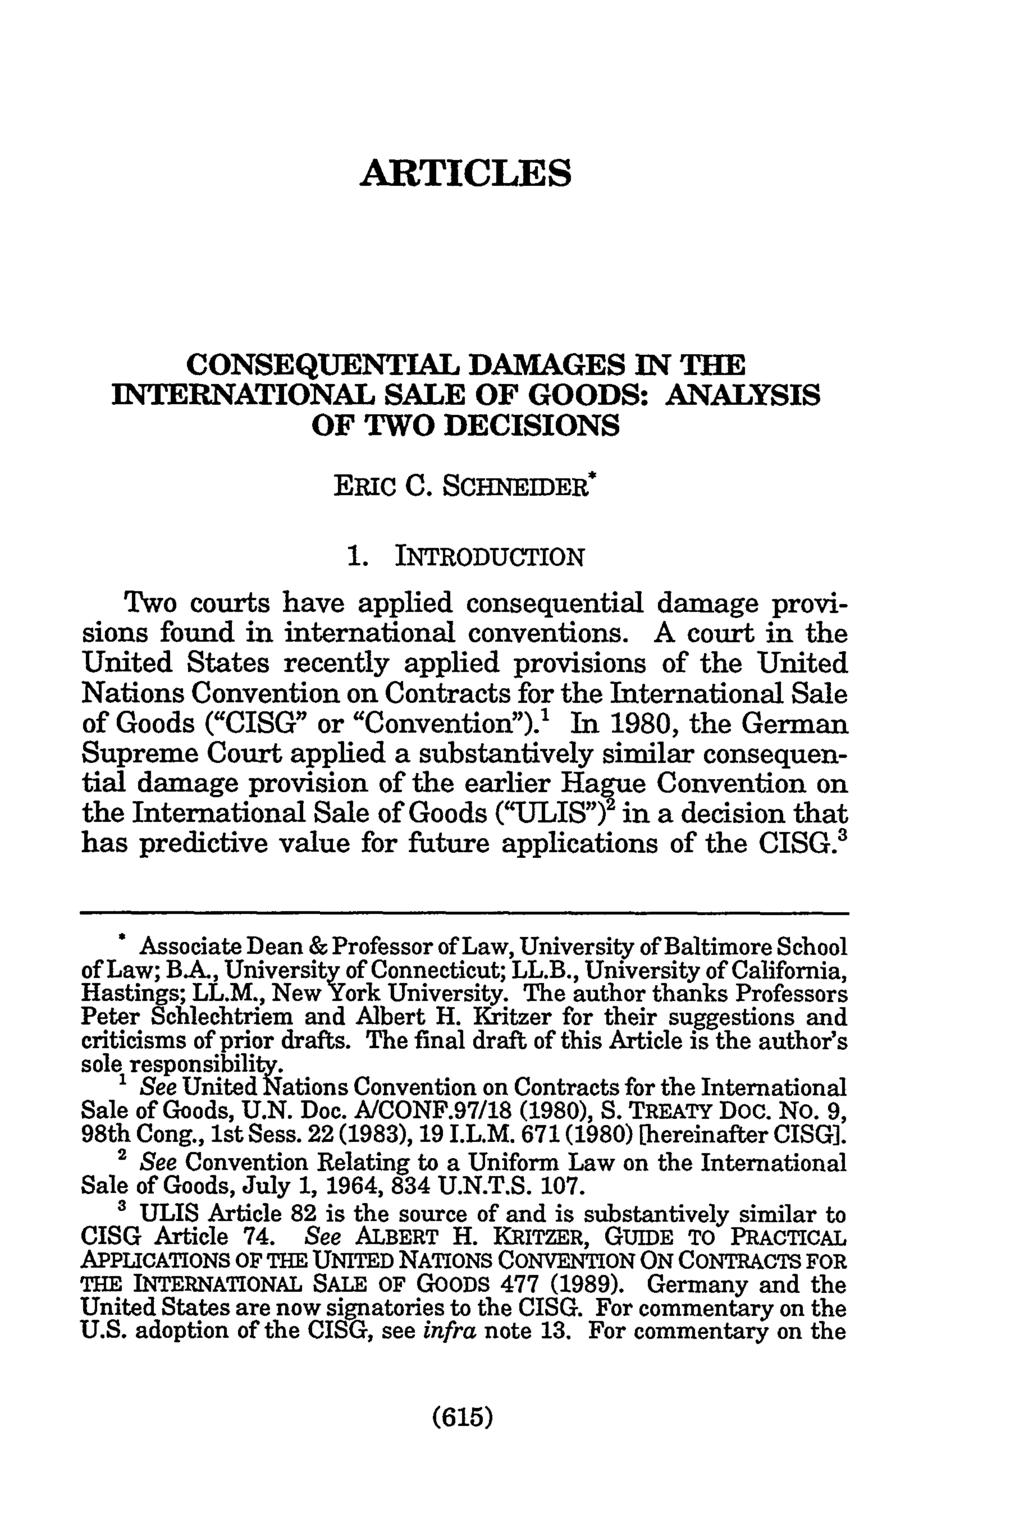 ARTICLES CONSEQUENTIAL DAMAGES IN THE INTERNATIONAL SALE OF GOODS: ANALYSIS OF TWO DECISIONS ERIC C. SCHNEmER* 1.